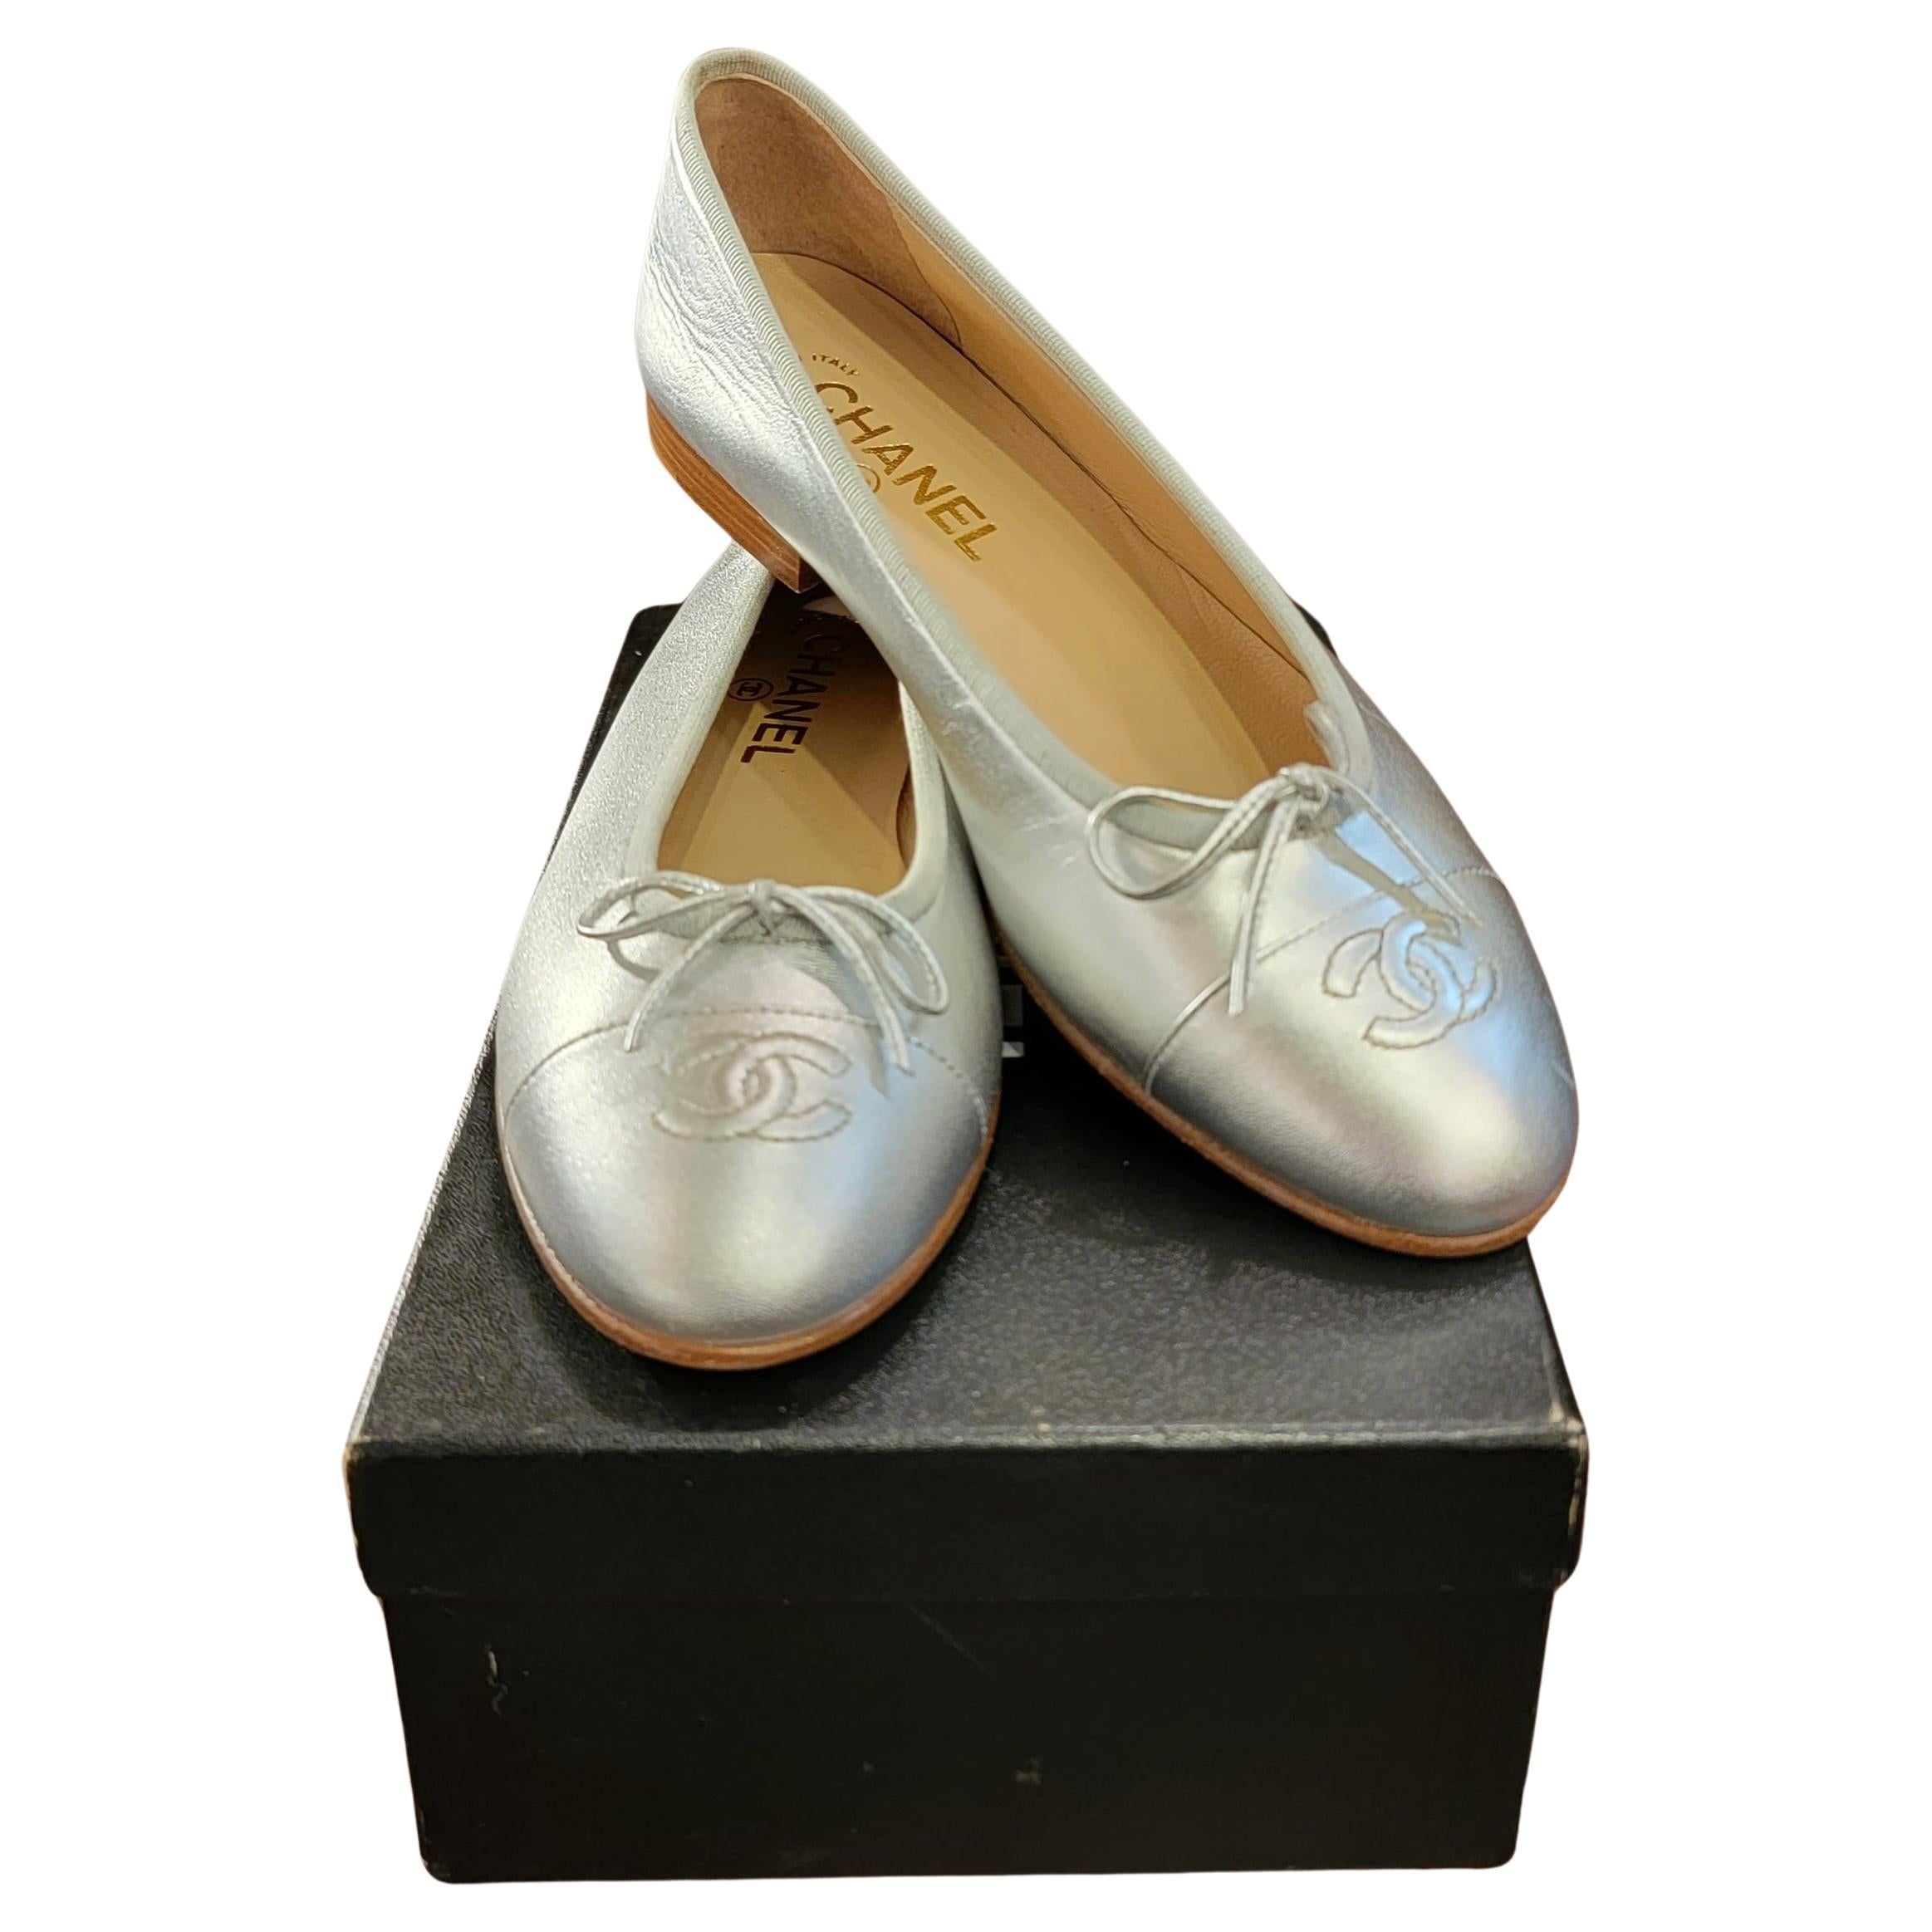 Rare Brand New Chanel Ballerina Size 39 Metalic Silver Shoes For